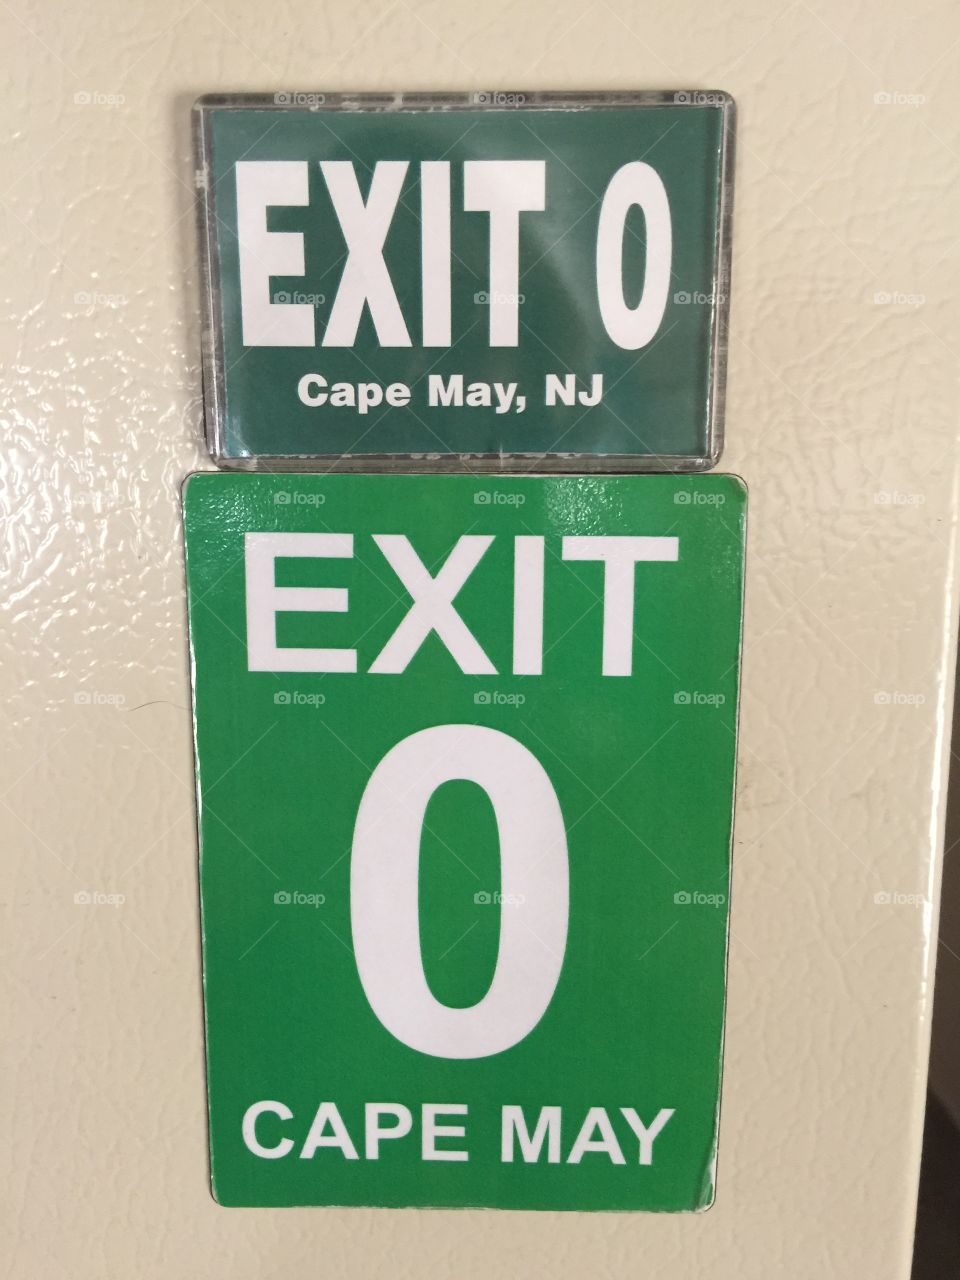 Exit 0 magnets on my fridge from Cape May NJ My Happy Place!